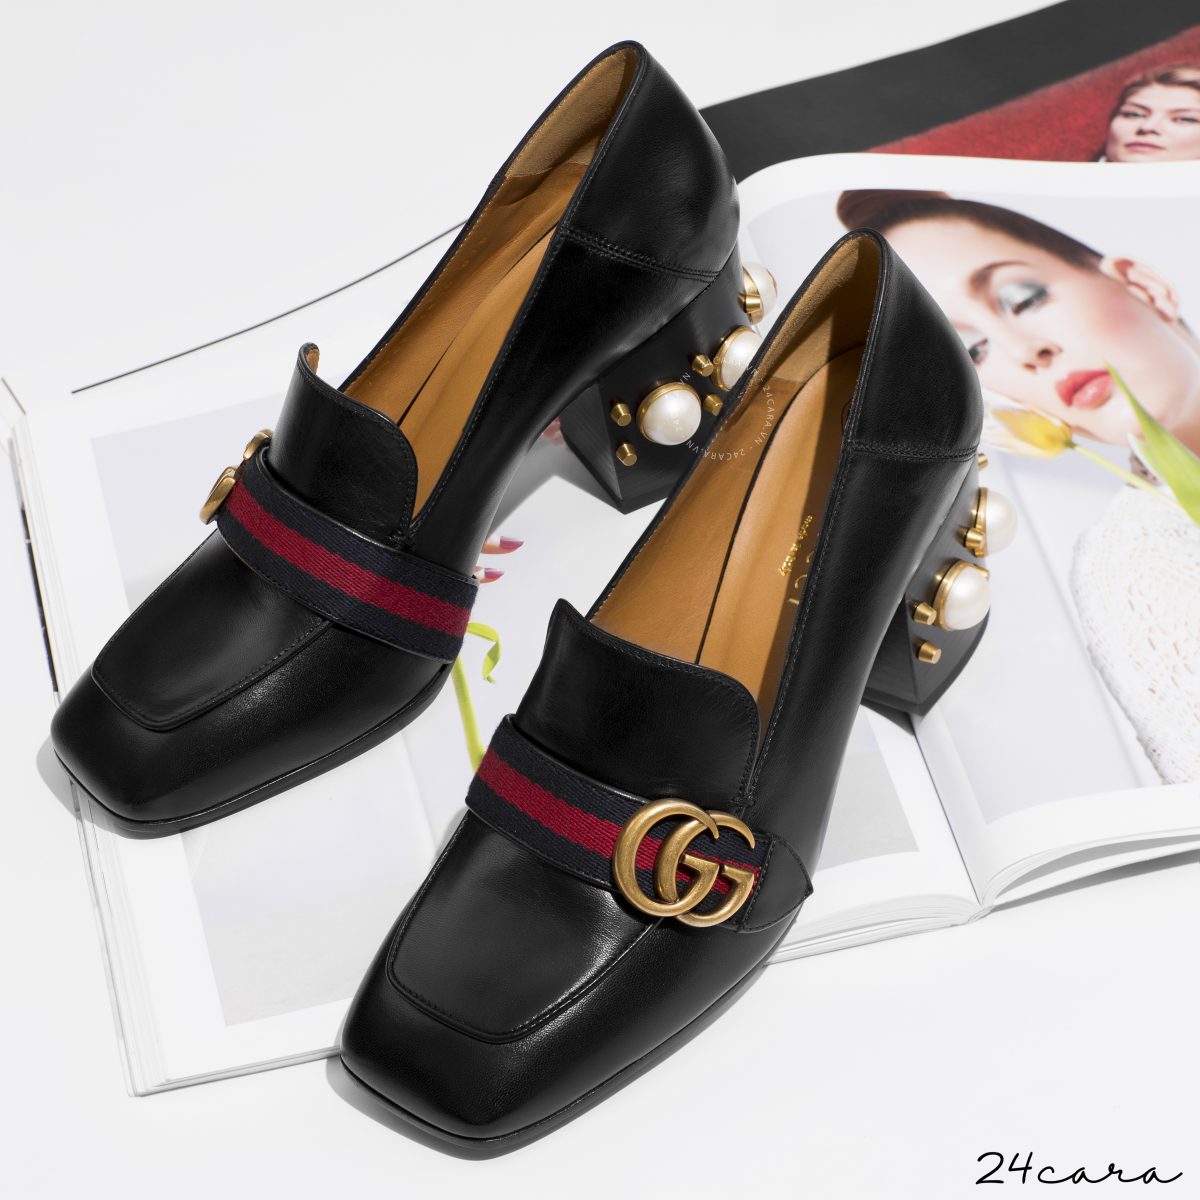 GUCCI LEATHER MID-HEEL LOAFER